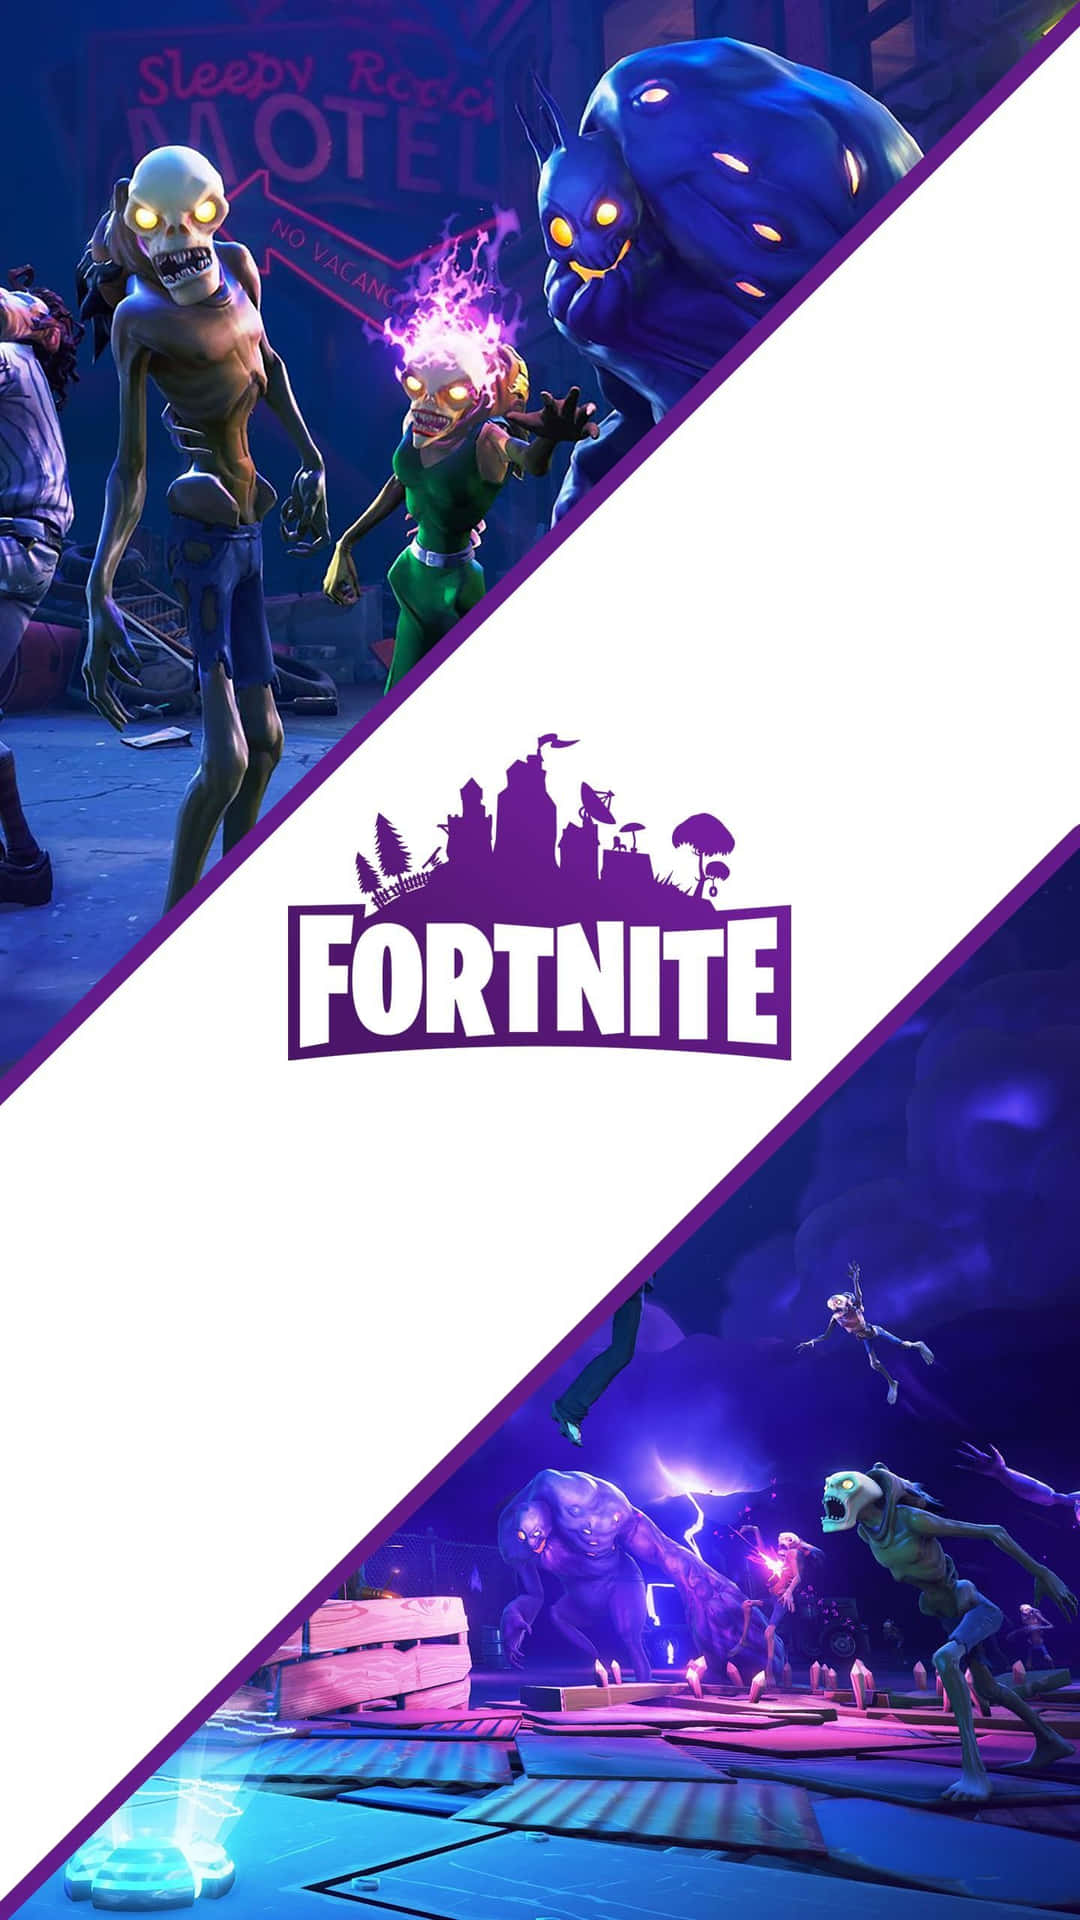 Enjoy Playing Fortnite On Your Iphone Wallpaper